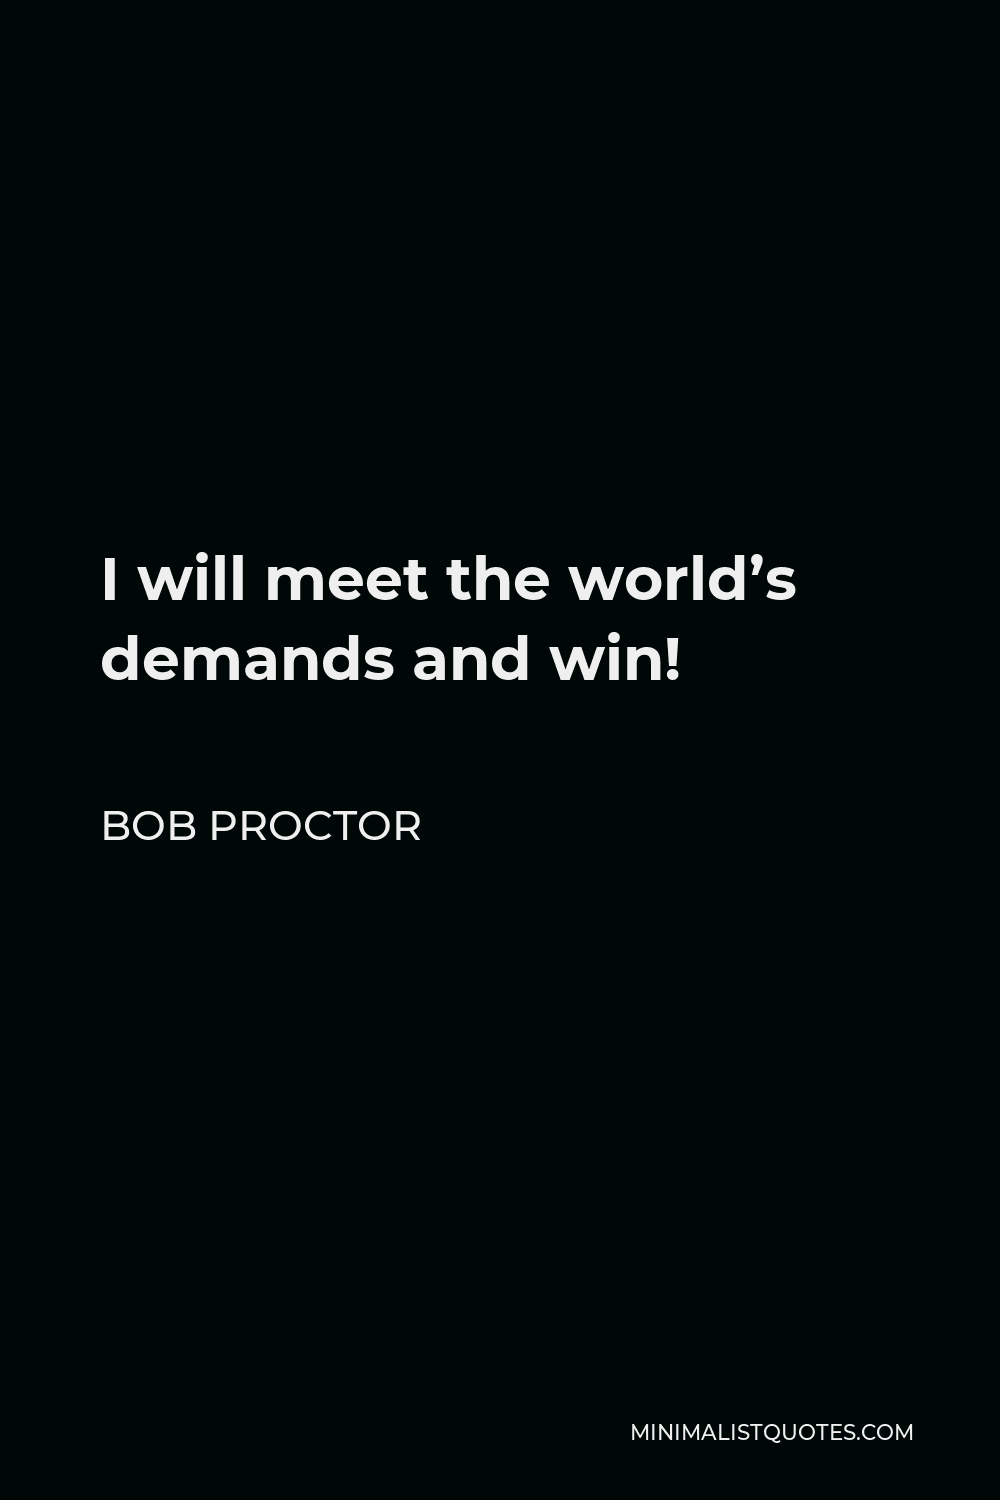 Bob Proctor Quote - I will meet the world’s demands and win!